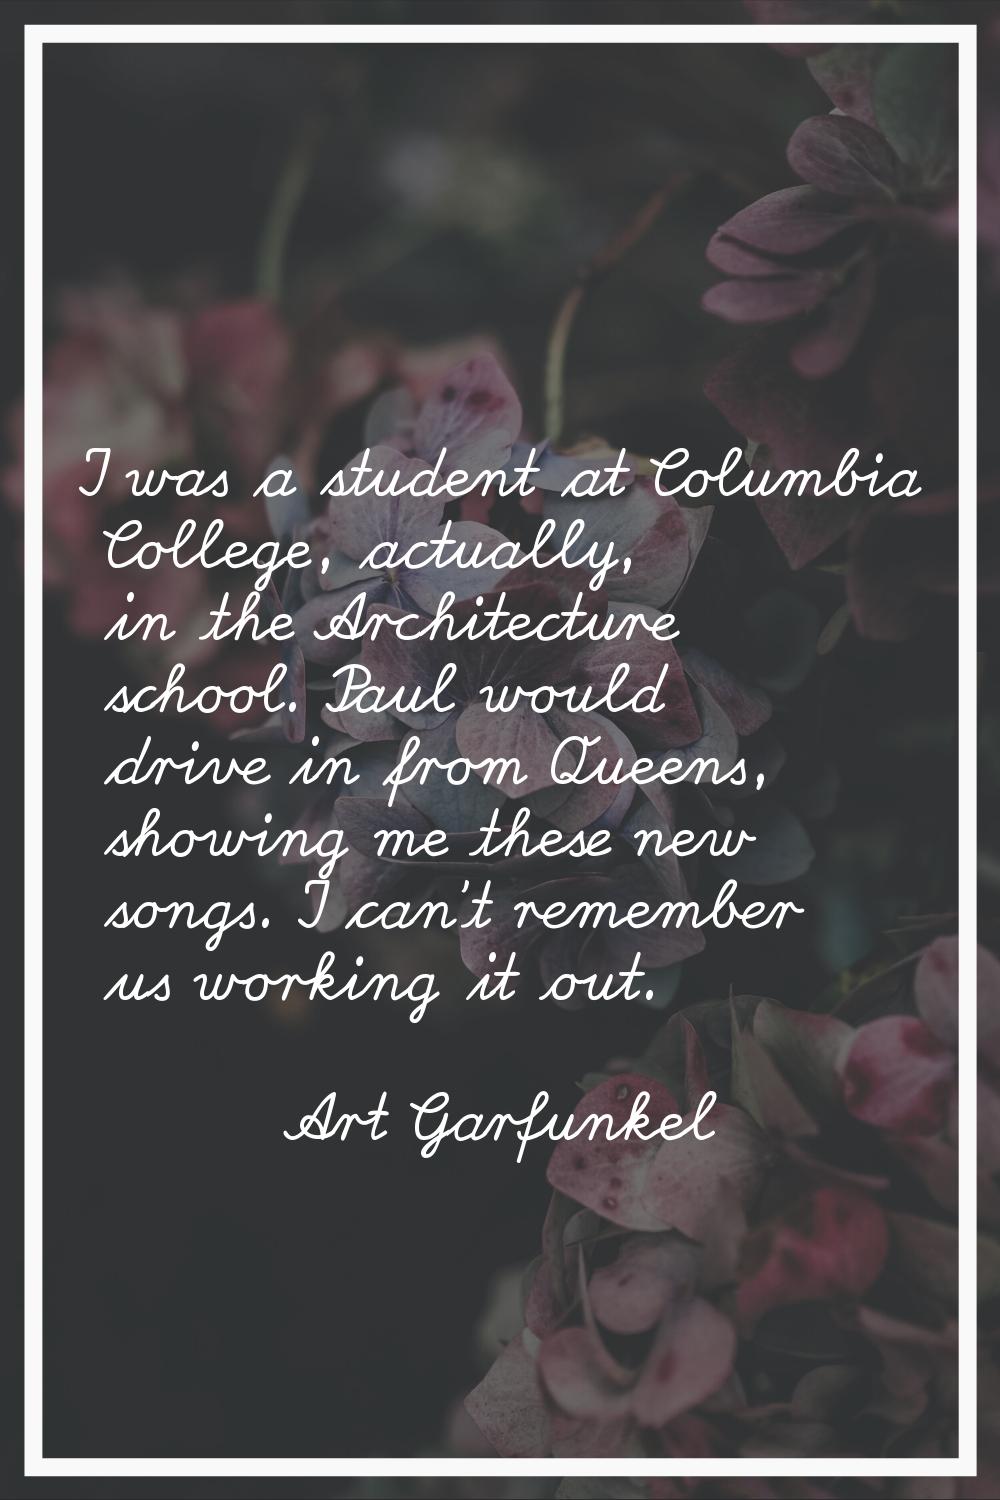 I was a student at Columbia College, actually, in the Architecture school. Paul would drive in from